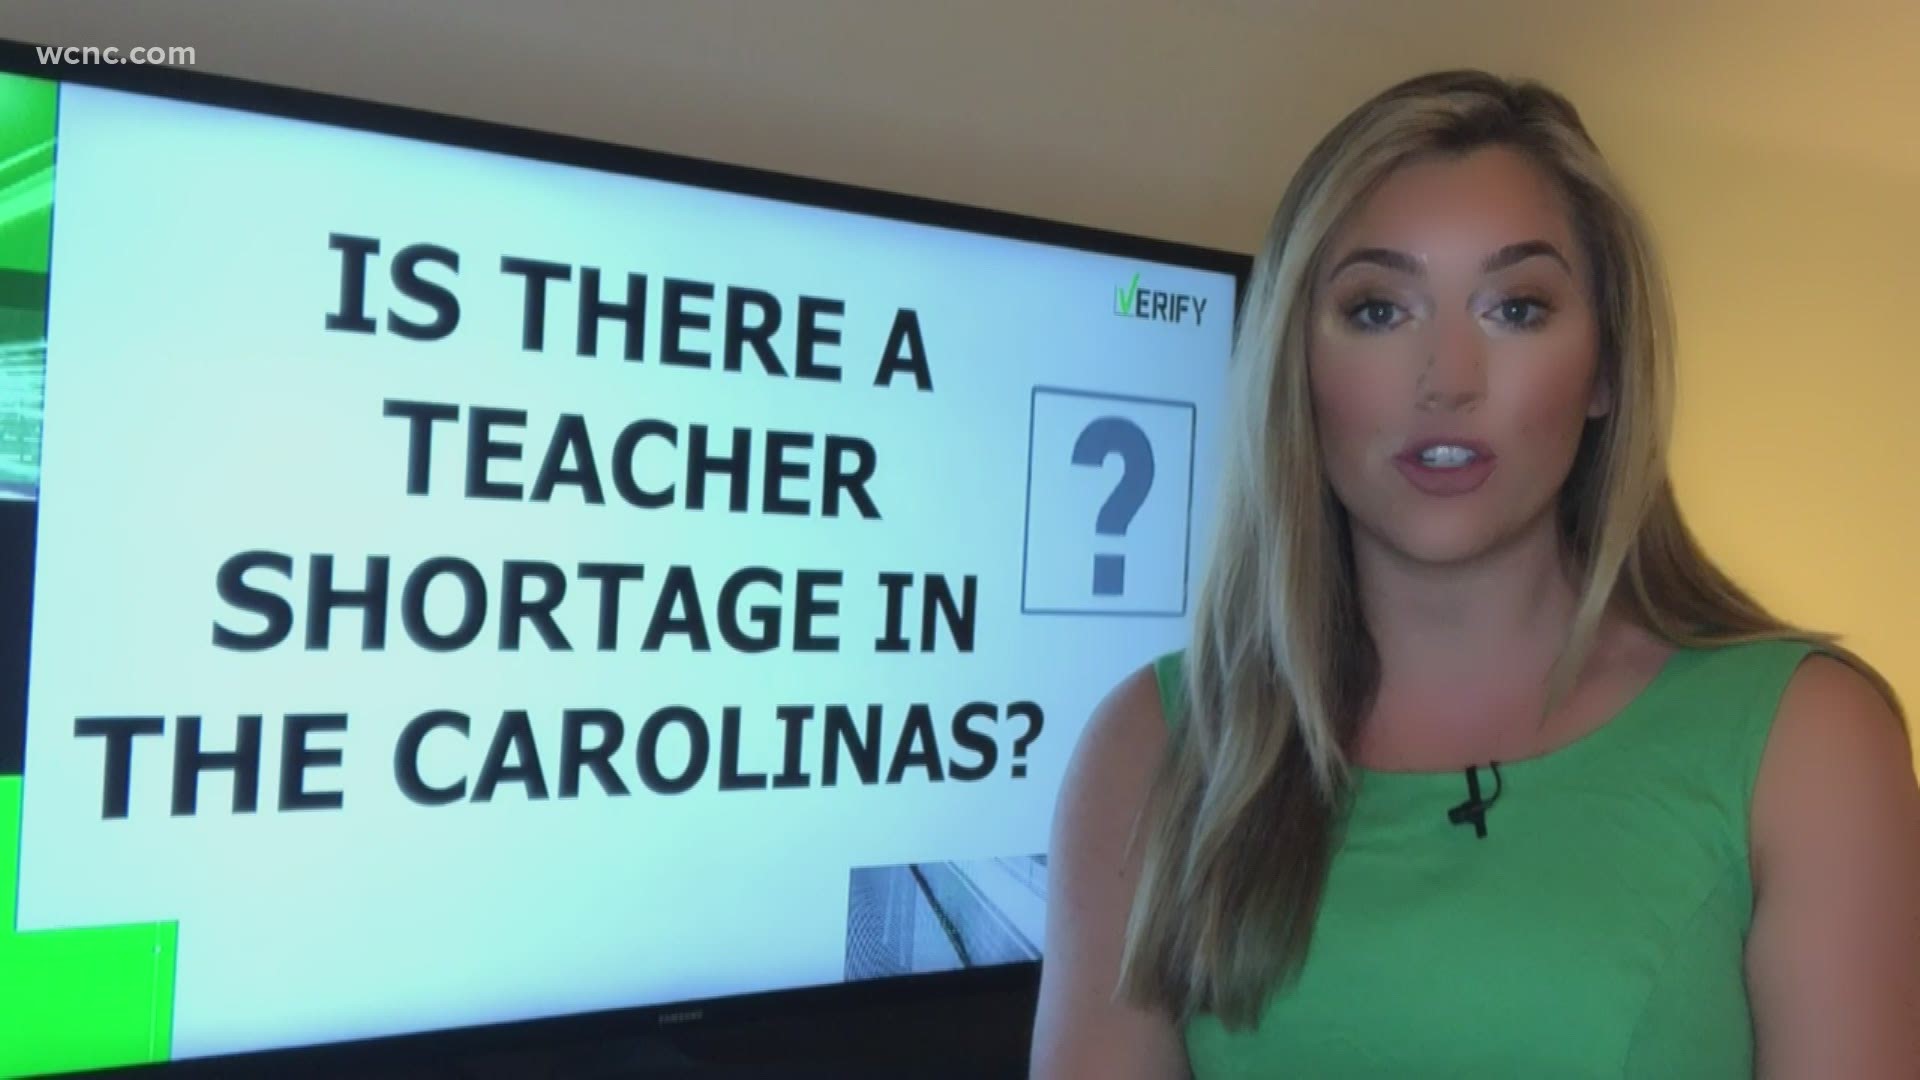 According to South Carolina state data, almost 6,000 teachers did not return to their district in the 2020-21 school year. Is there a shortage of educators?